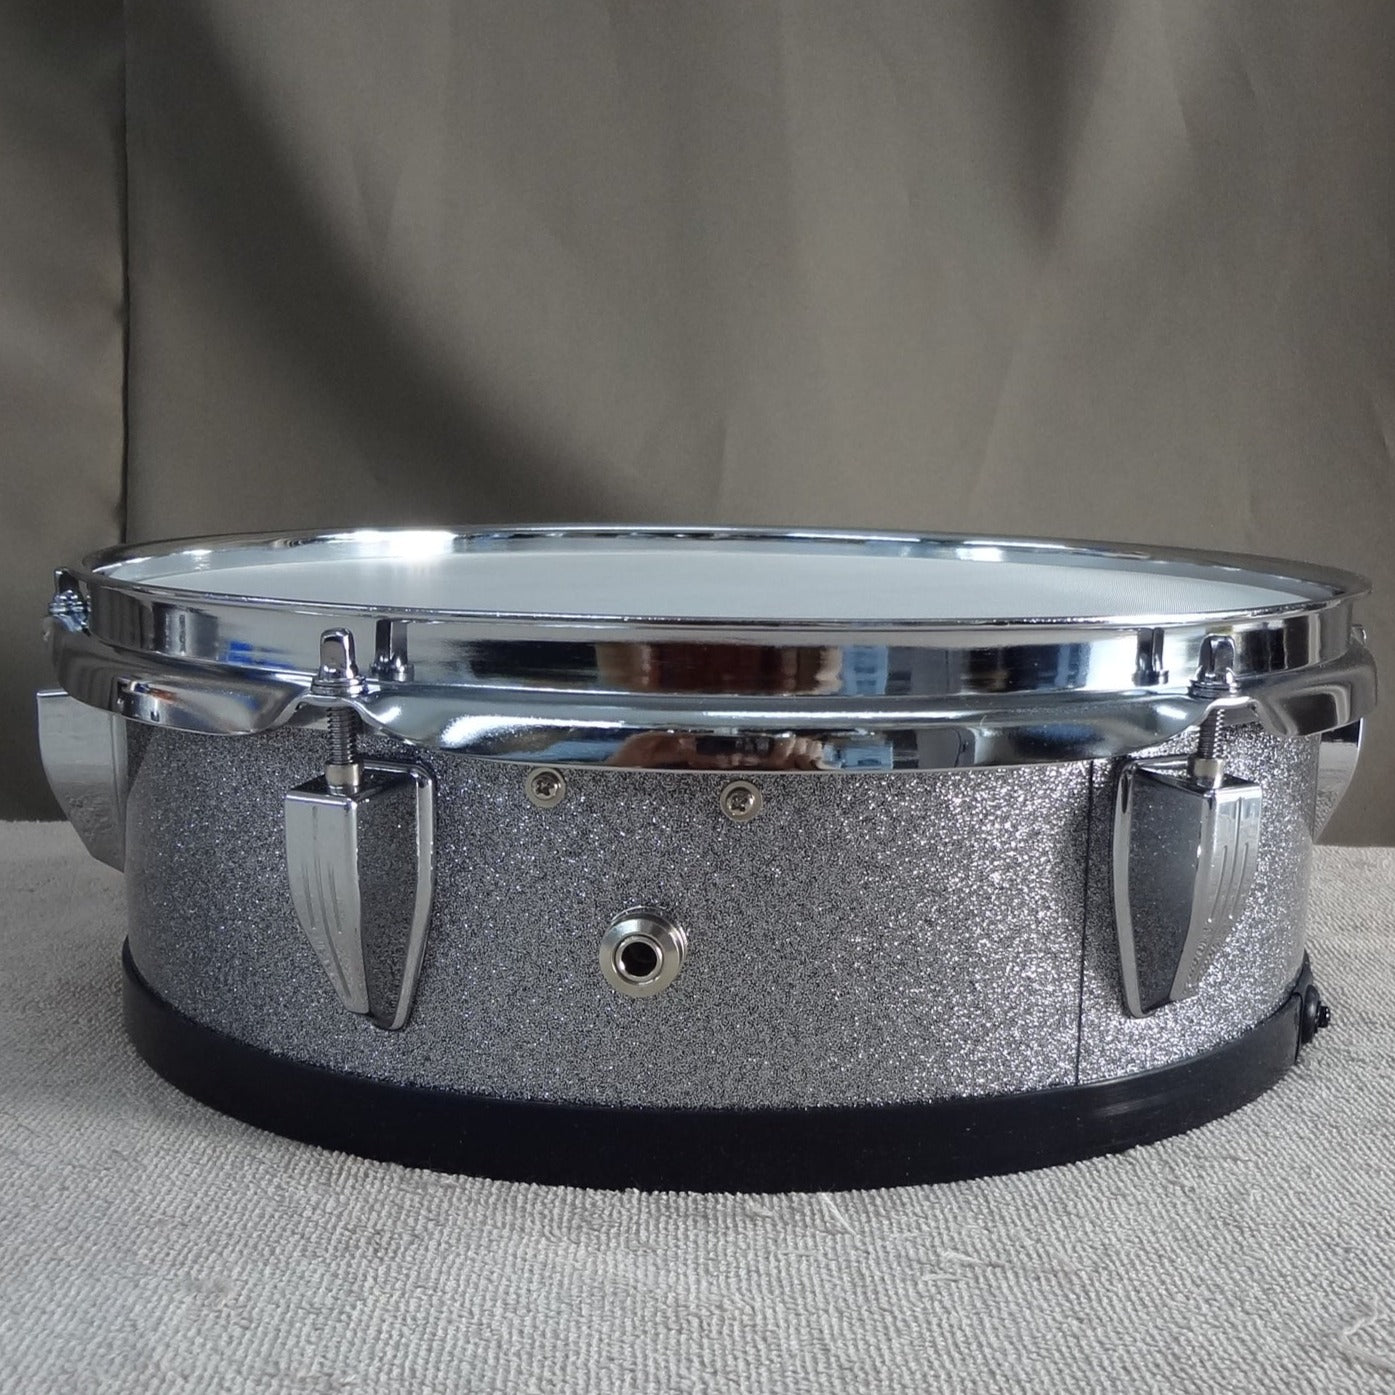 Refurbished 12 Inch Custom Built Electronic Snare Drum - Silver Sparkle